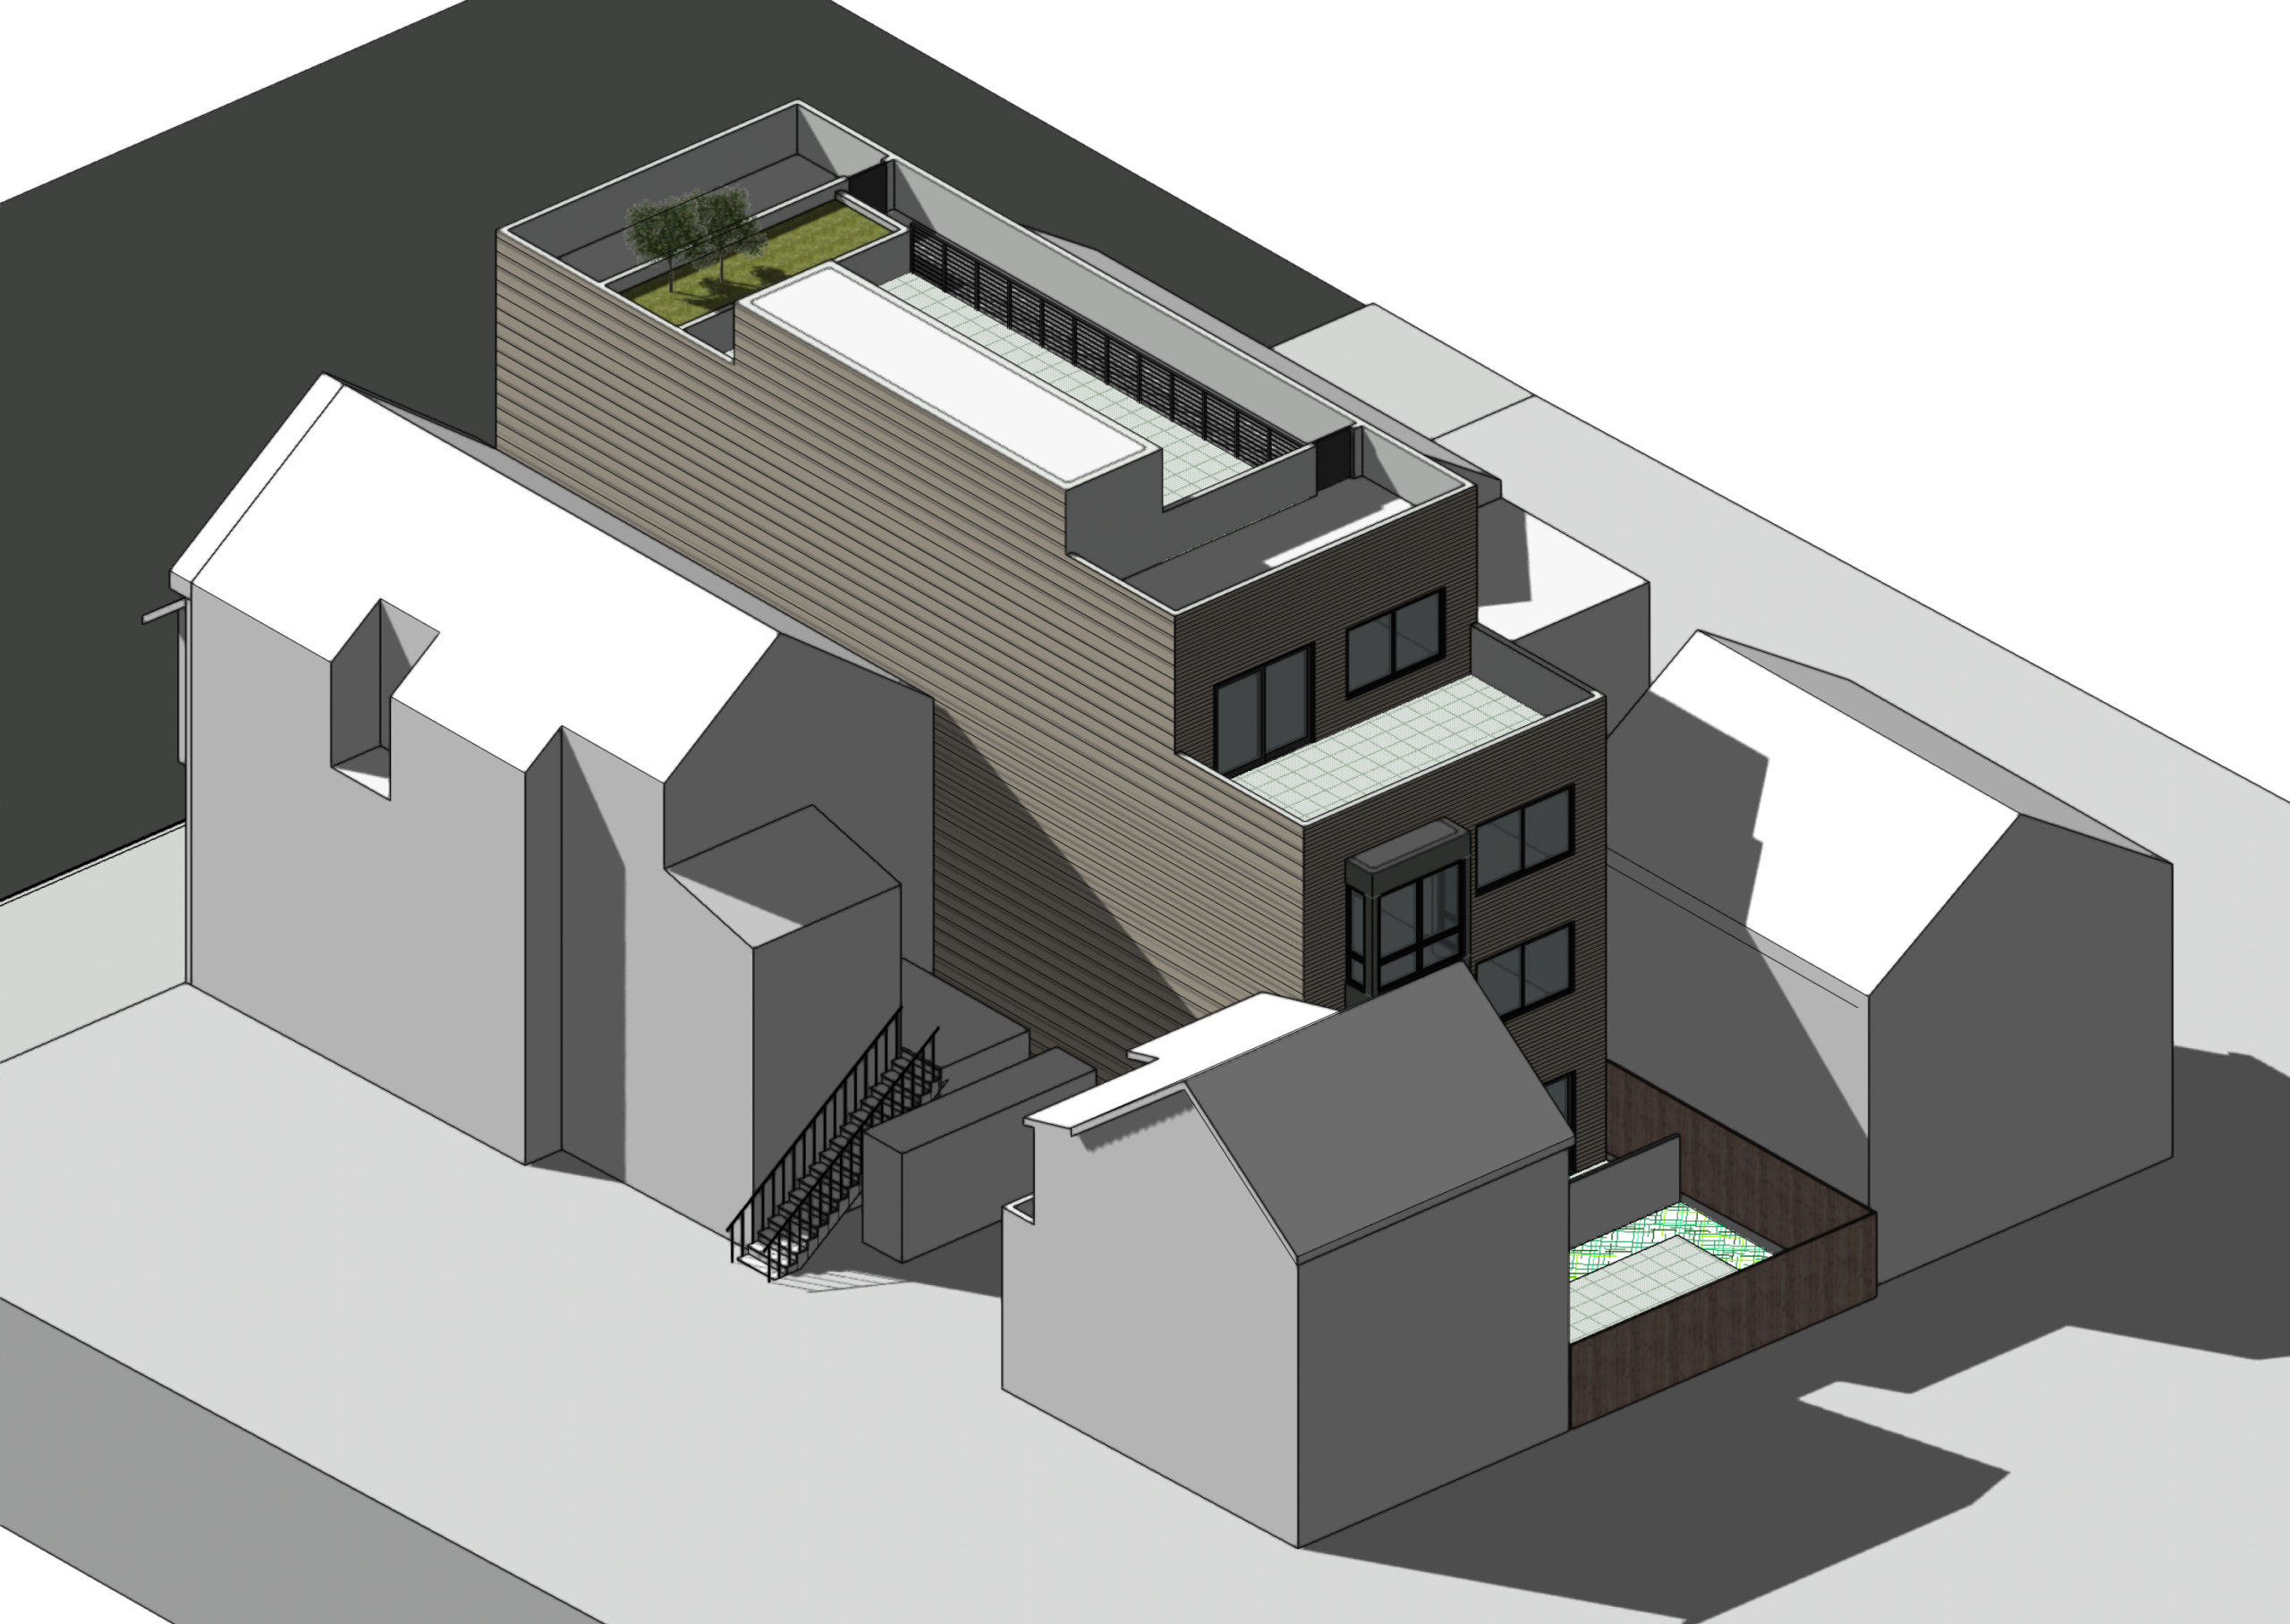 2420-2424 Clement Street aerial view of the lot's rear, illustration by SIA Consulting